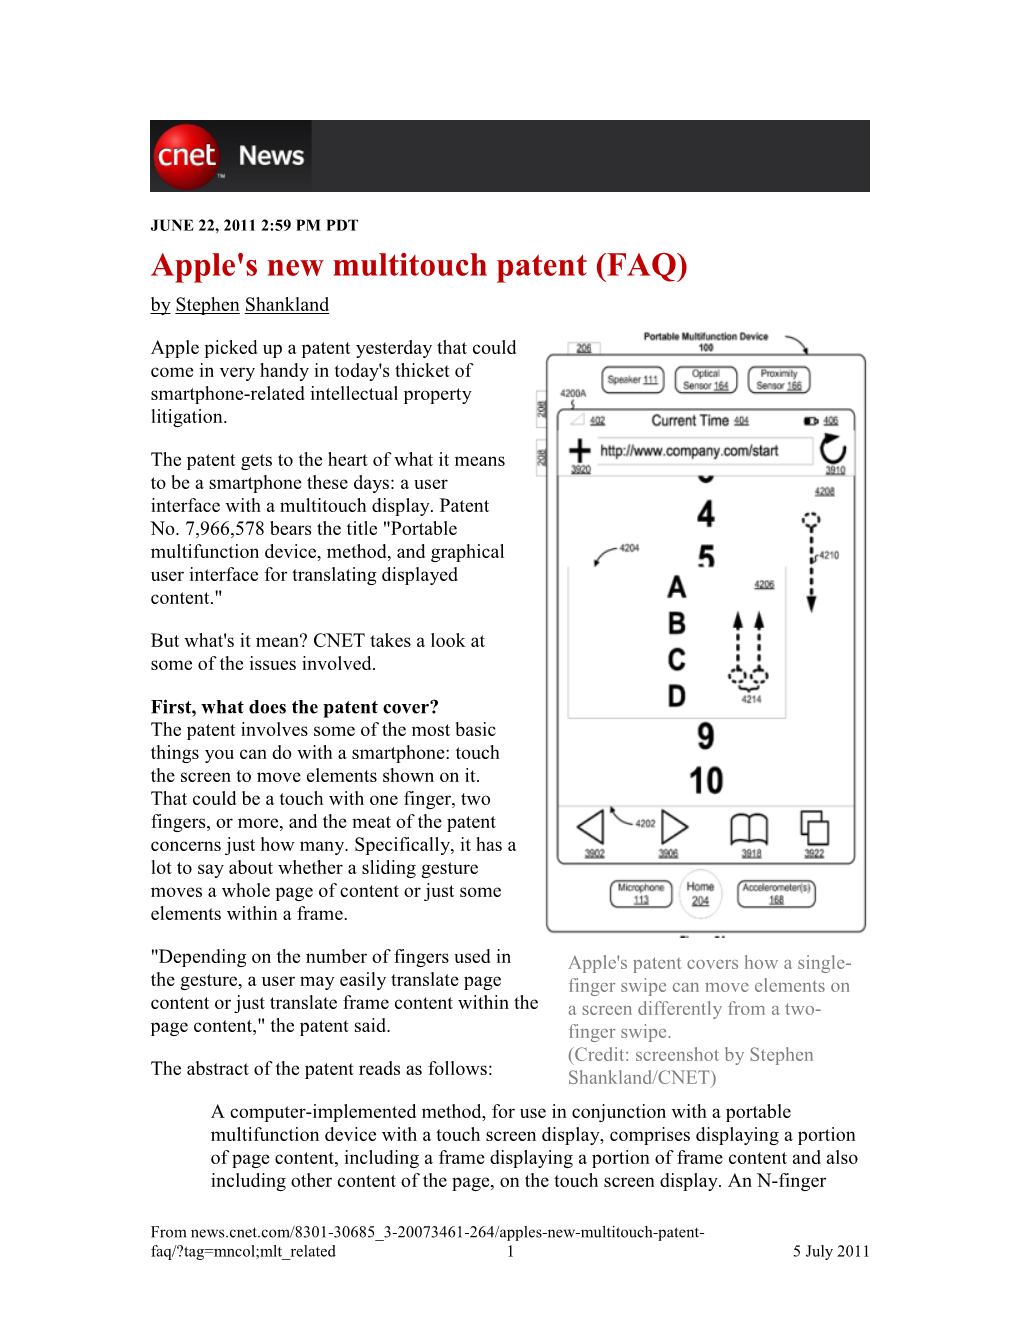 Apple's New Multitouch Patent (FAQ) by Stephen Shankland